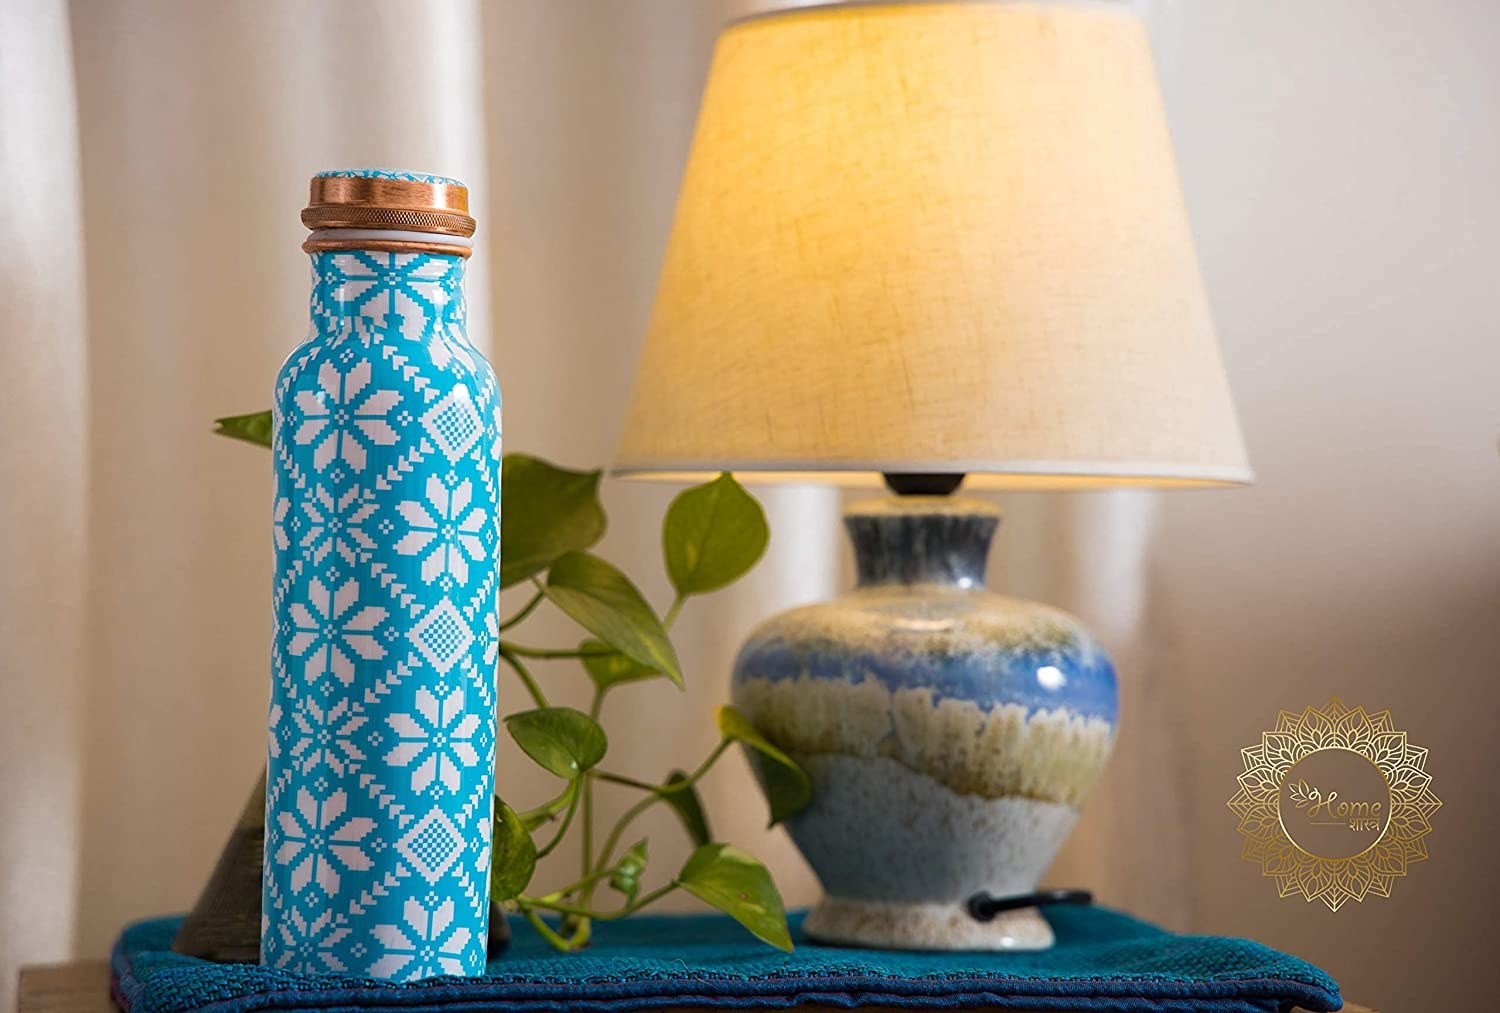 A copper bottle with blue and white snowflakes printed on it